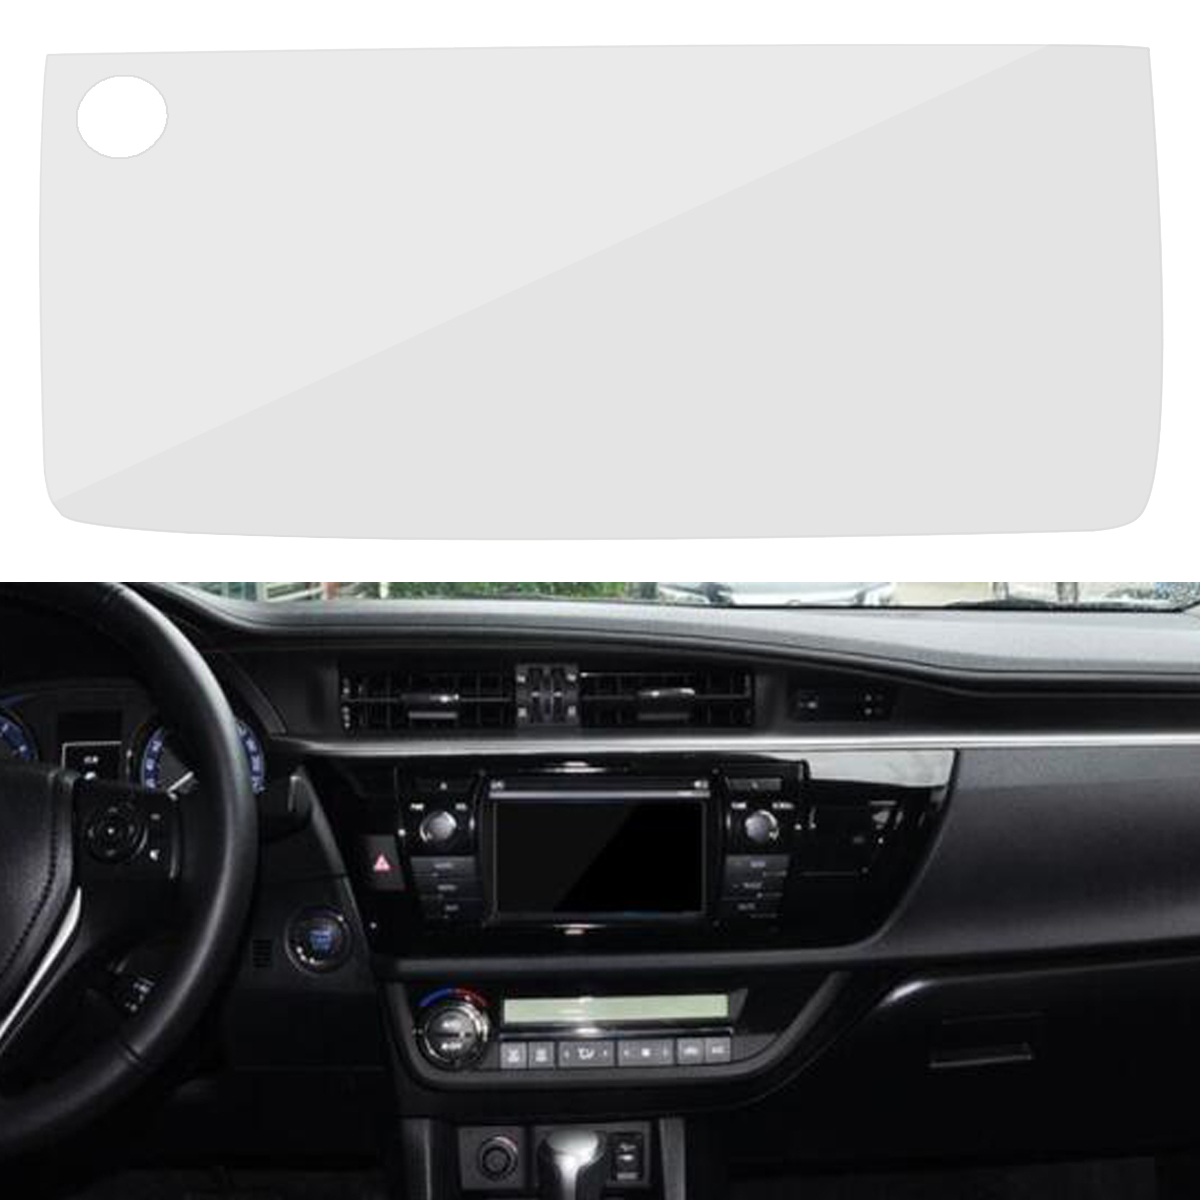 7 Inch Car Navigation Screen Protective Film Clear Center Touch Film for Honda CRV 2017 - Auto GoShop